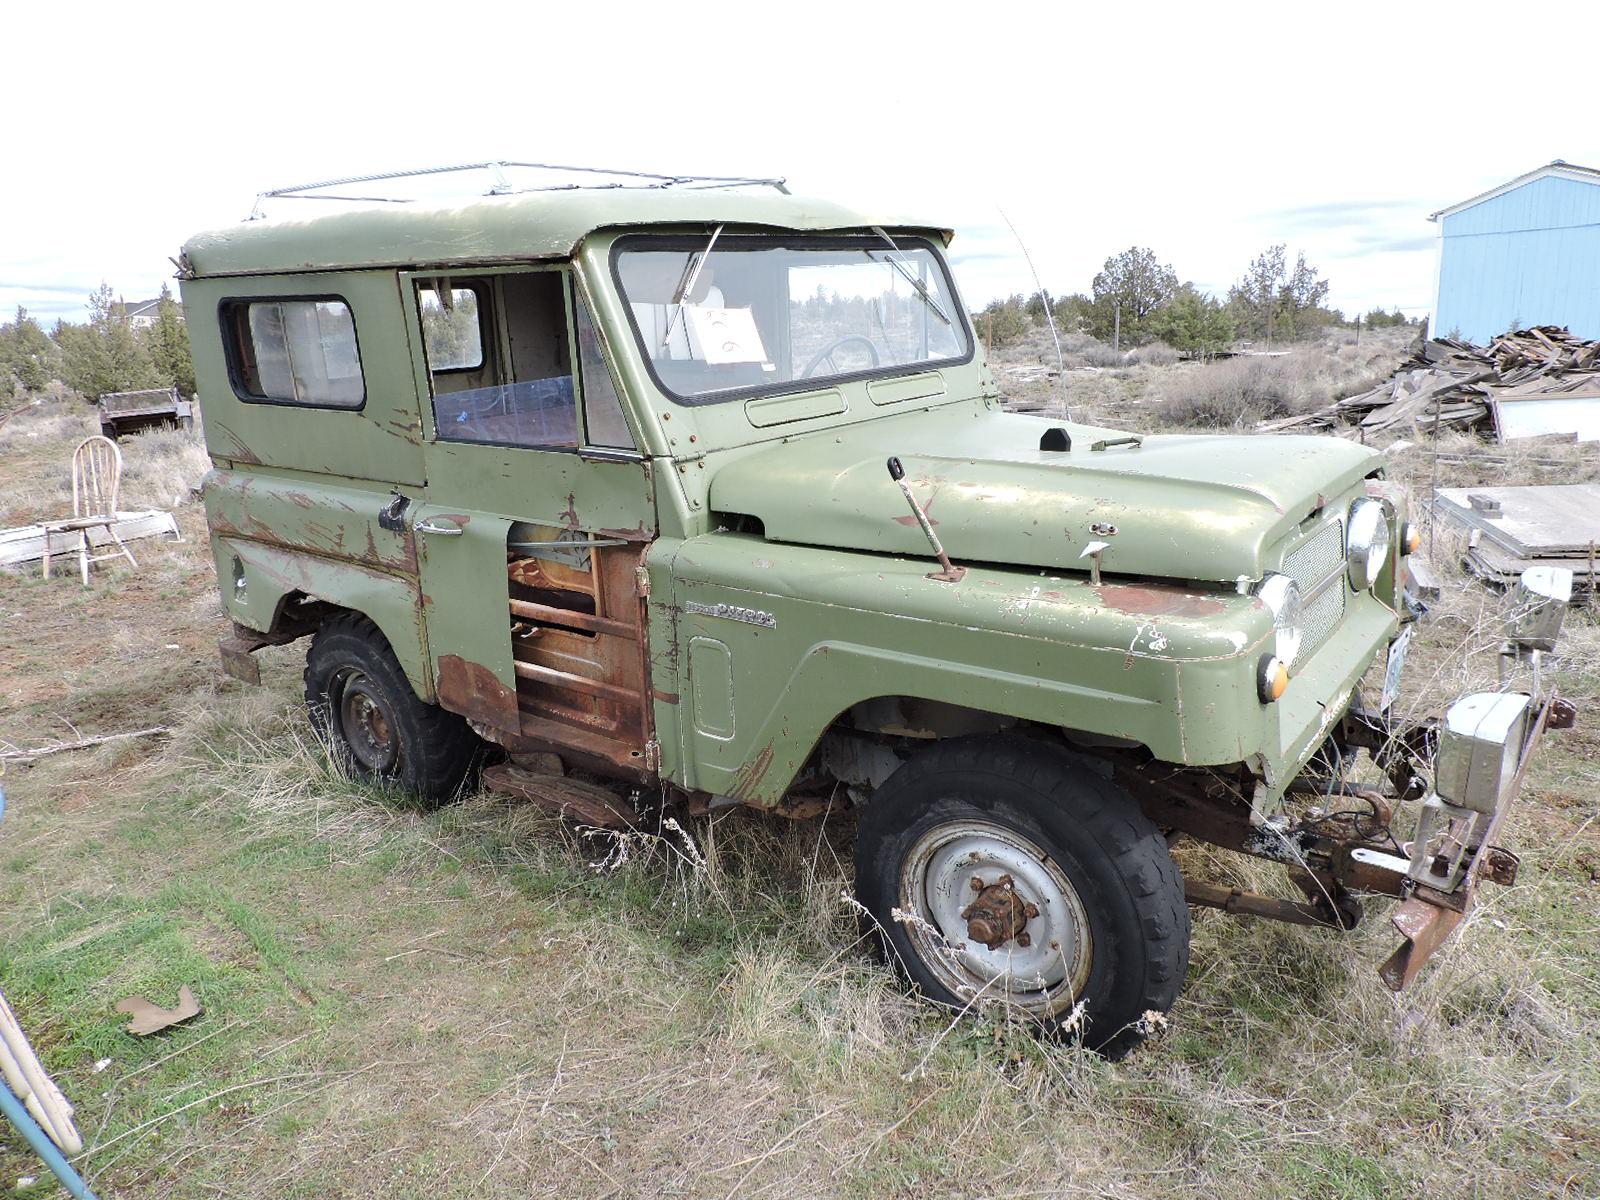 1969 Nissan Patrol with Removable Hardtop - 4WD, 6-Cyl., Manual Transmission